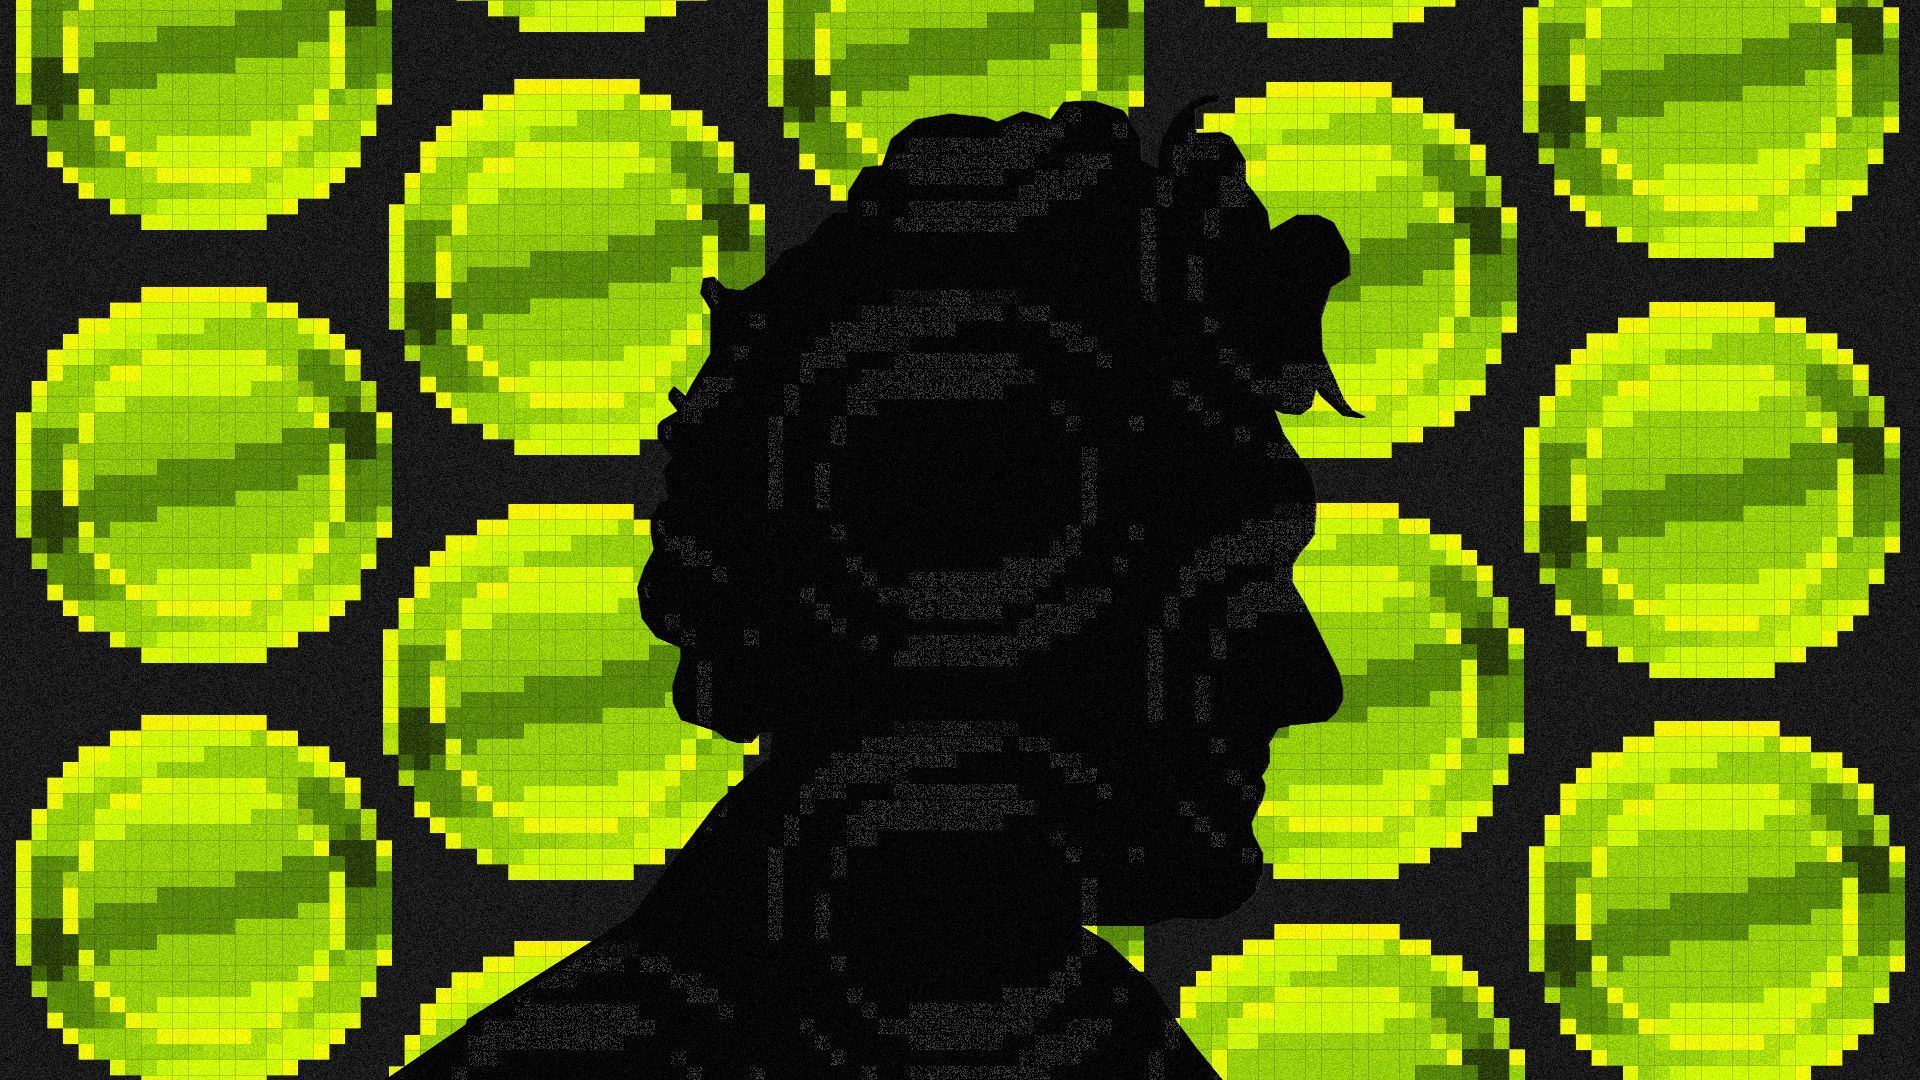 Photo illustration of Sam Bankman-Fried's silhouette in front of wall of falling pixelated coins colored dark green